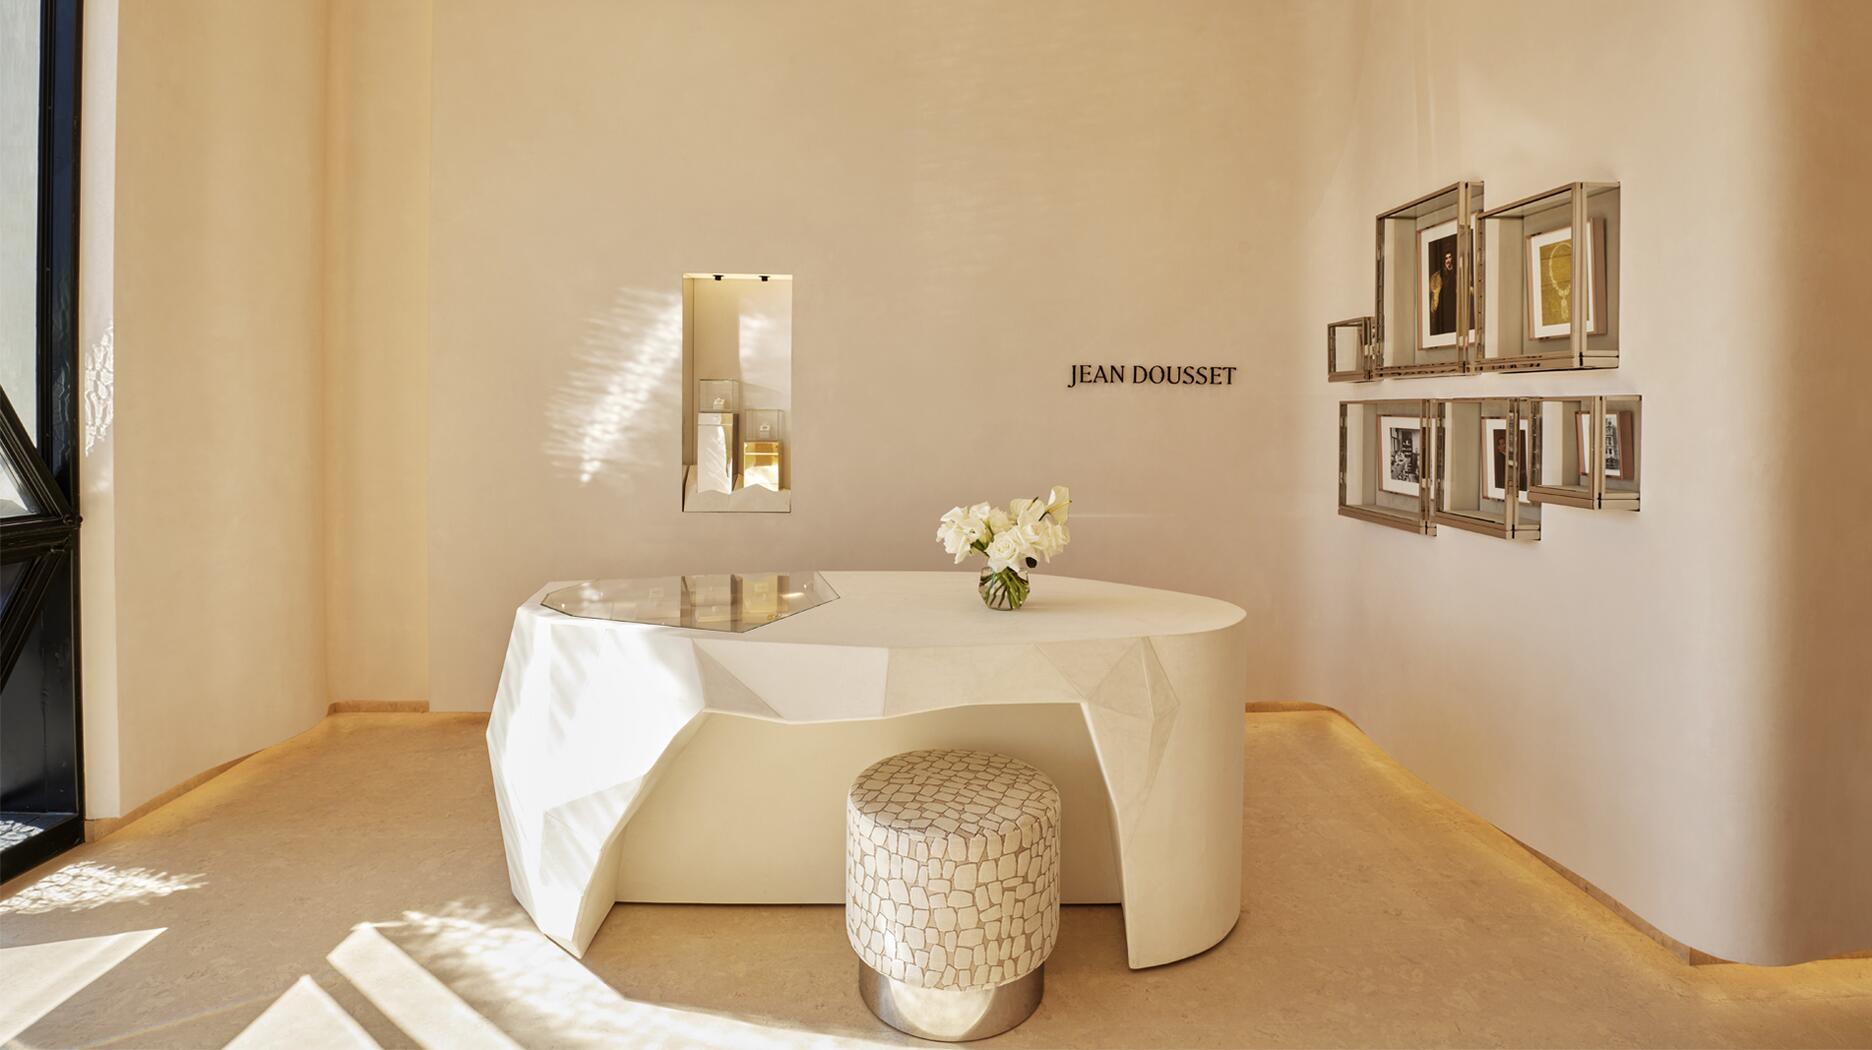 Jean Dousset lab-grown diamond jewelry West Hollywood store 